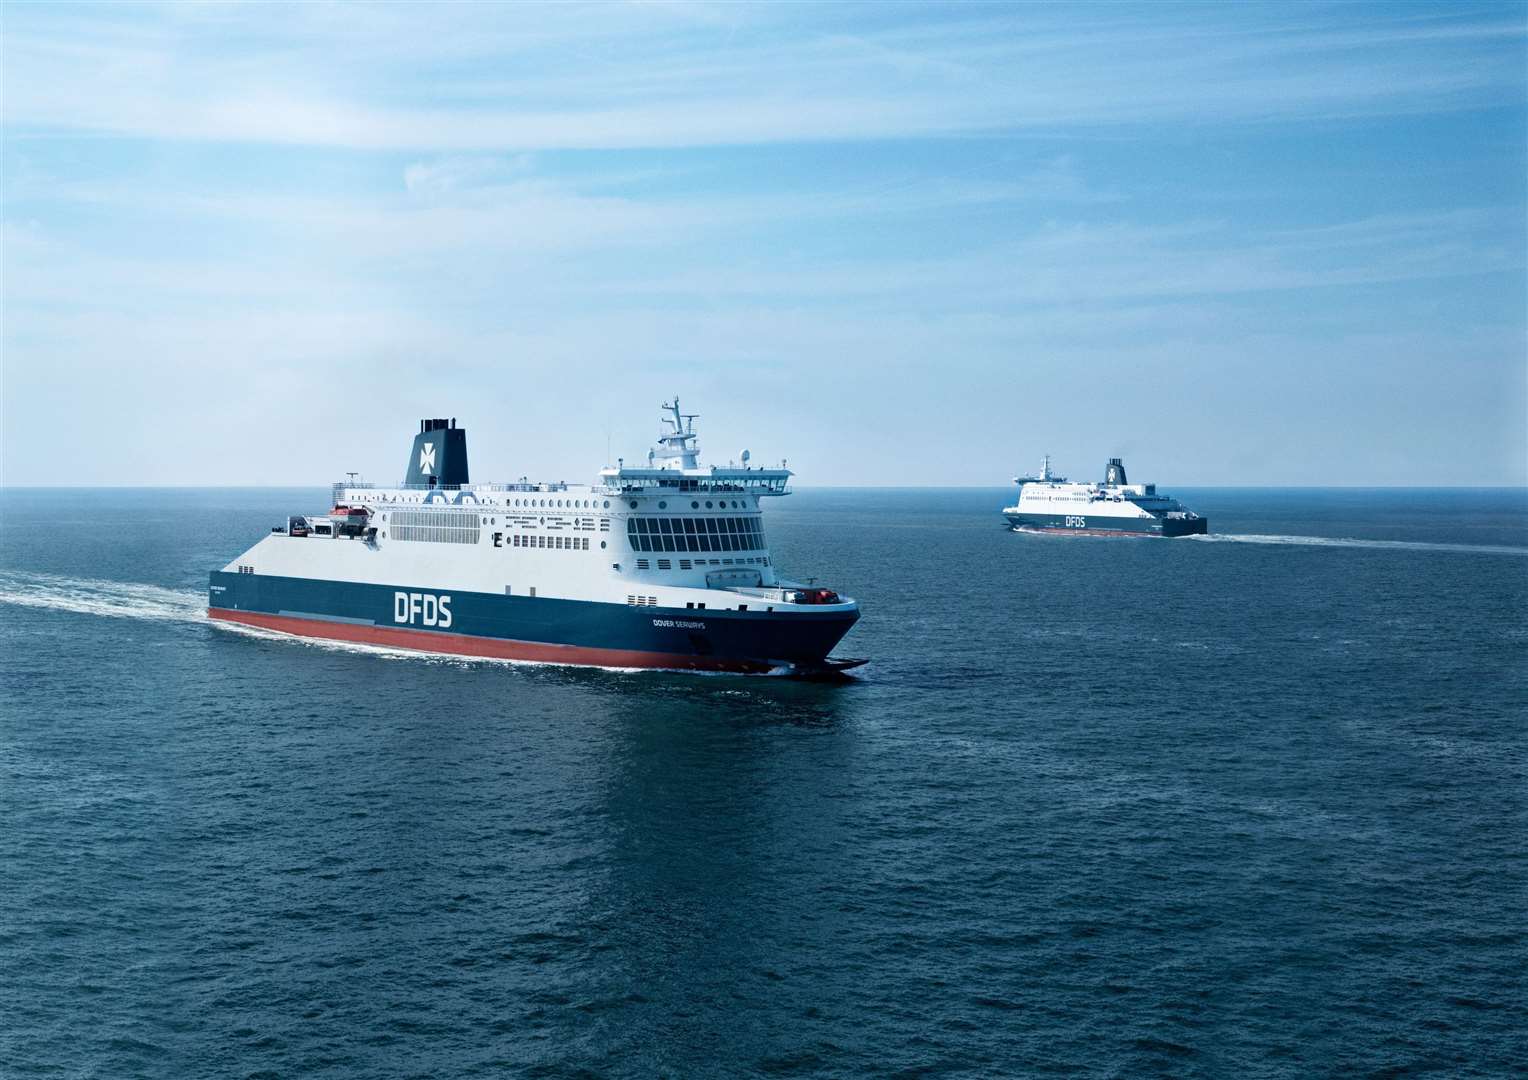 DFDS' Dover Seaways ferry